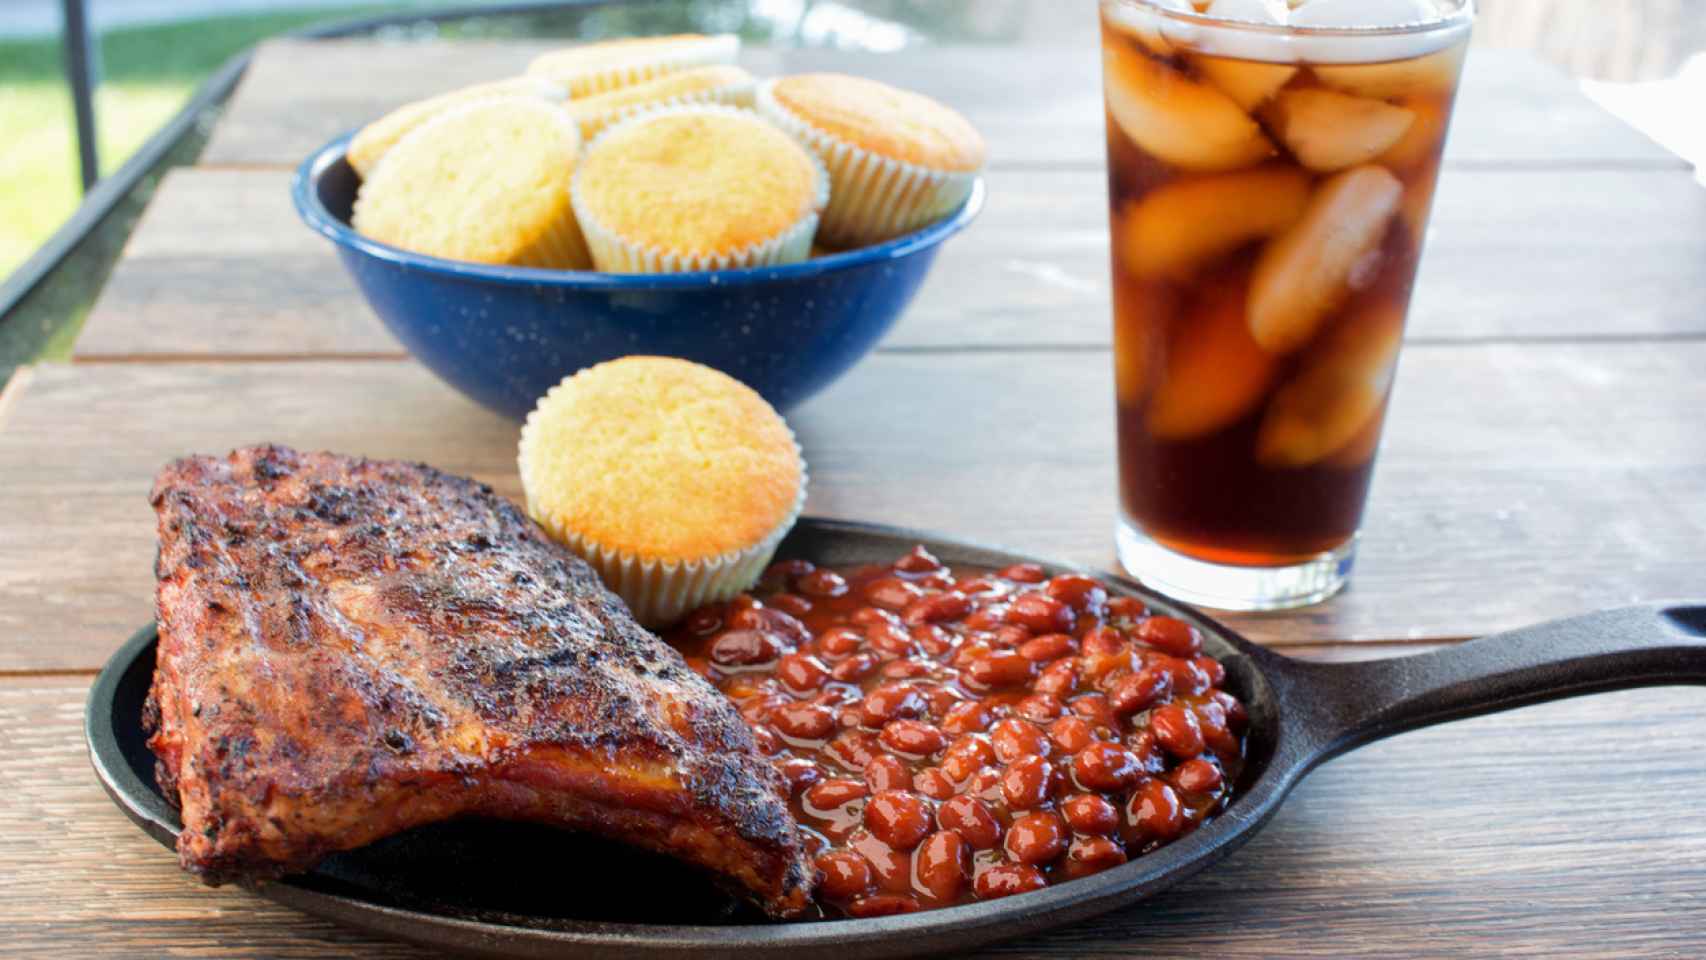 Delicious Pork Baby Back Ribs with Baked Beans  Corn Bread